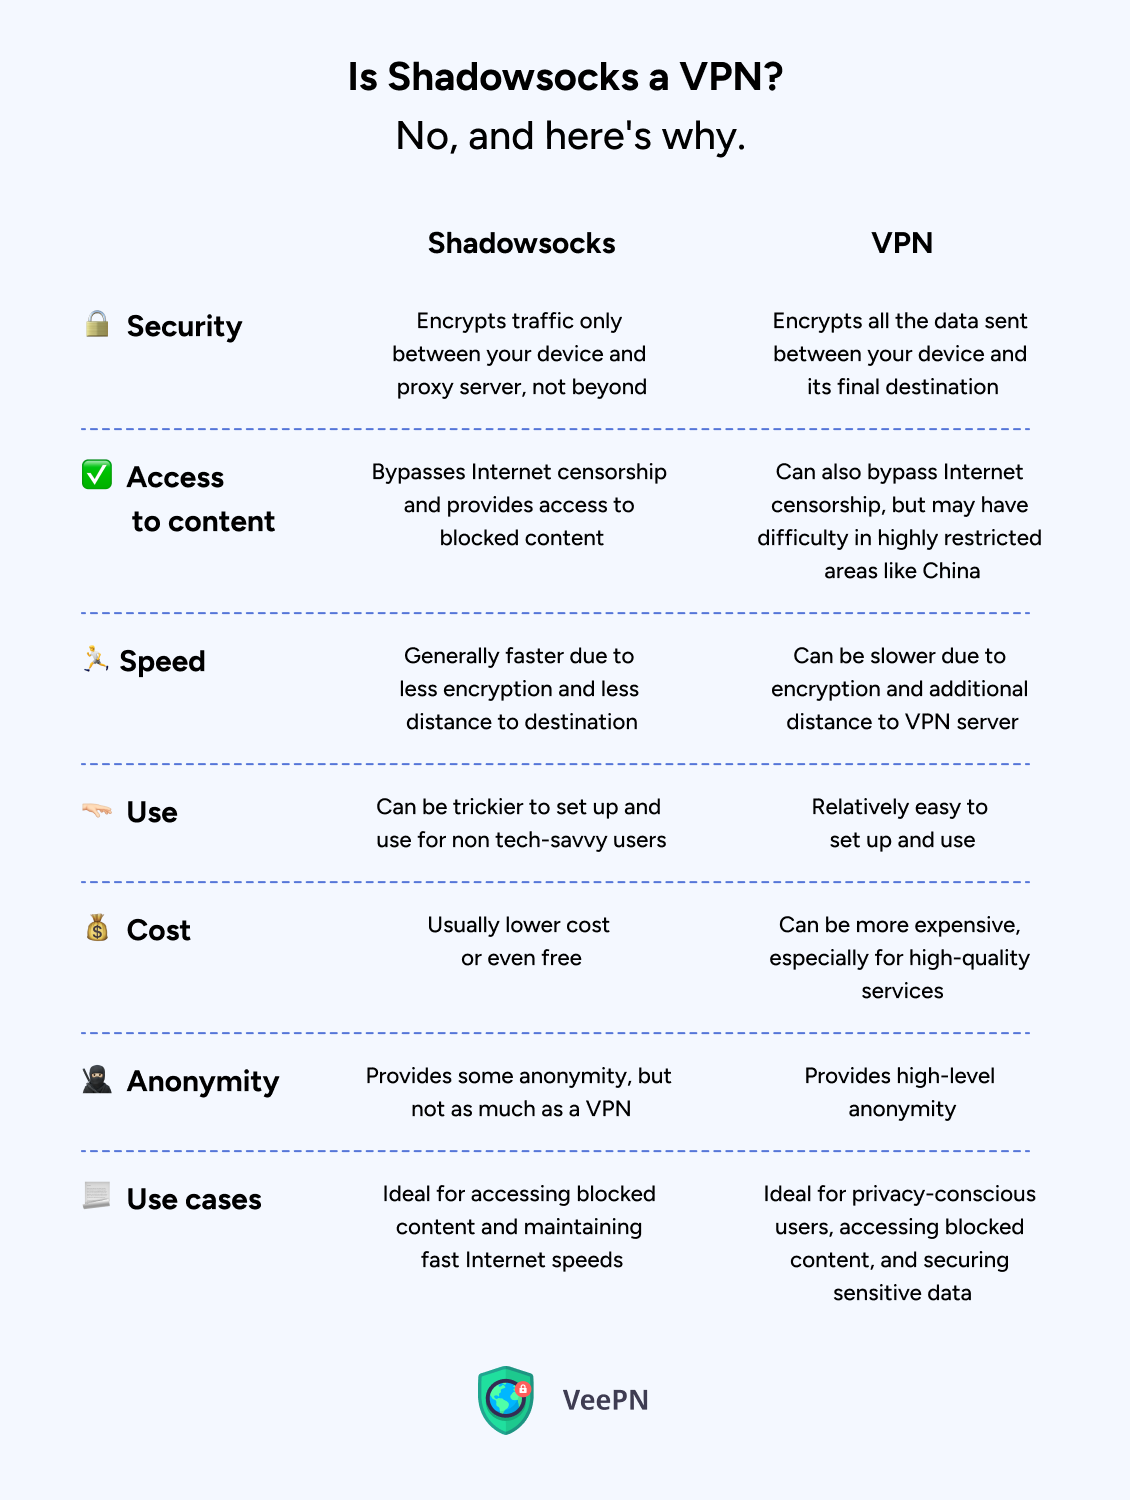 What is the difference between Shadowsocks and VPN?